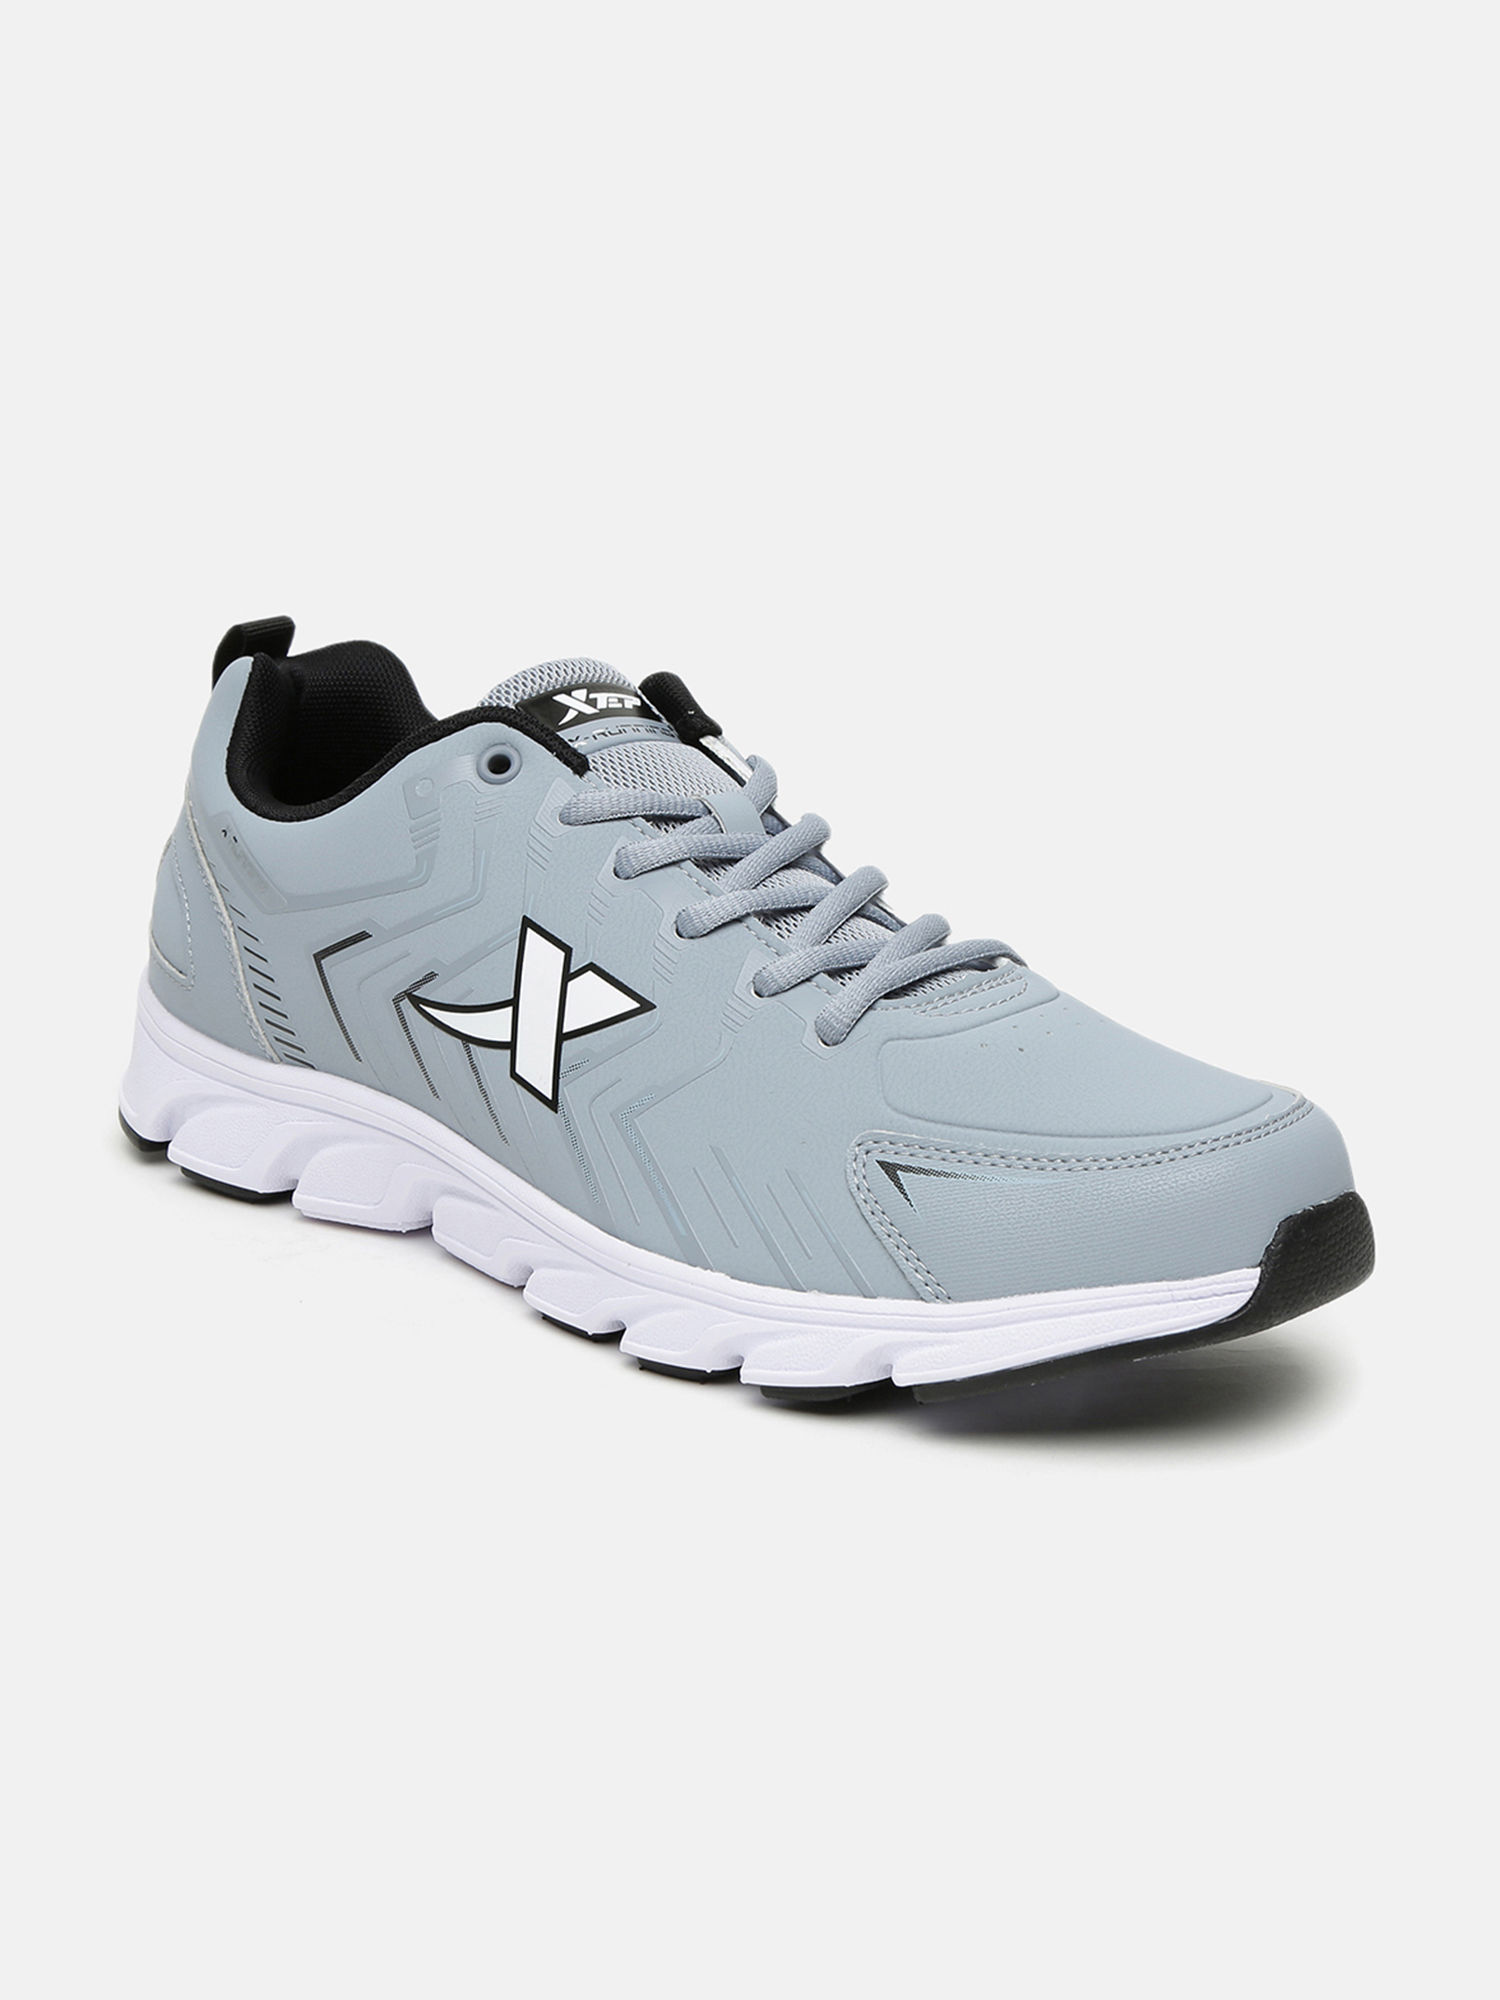 XTEP Grey Solid Running Shoes - EURO 42: Buy XTEP Grey Solid Running ...